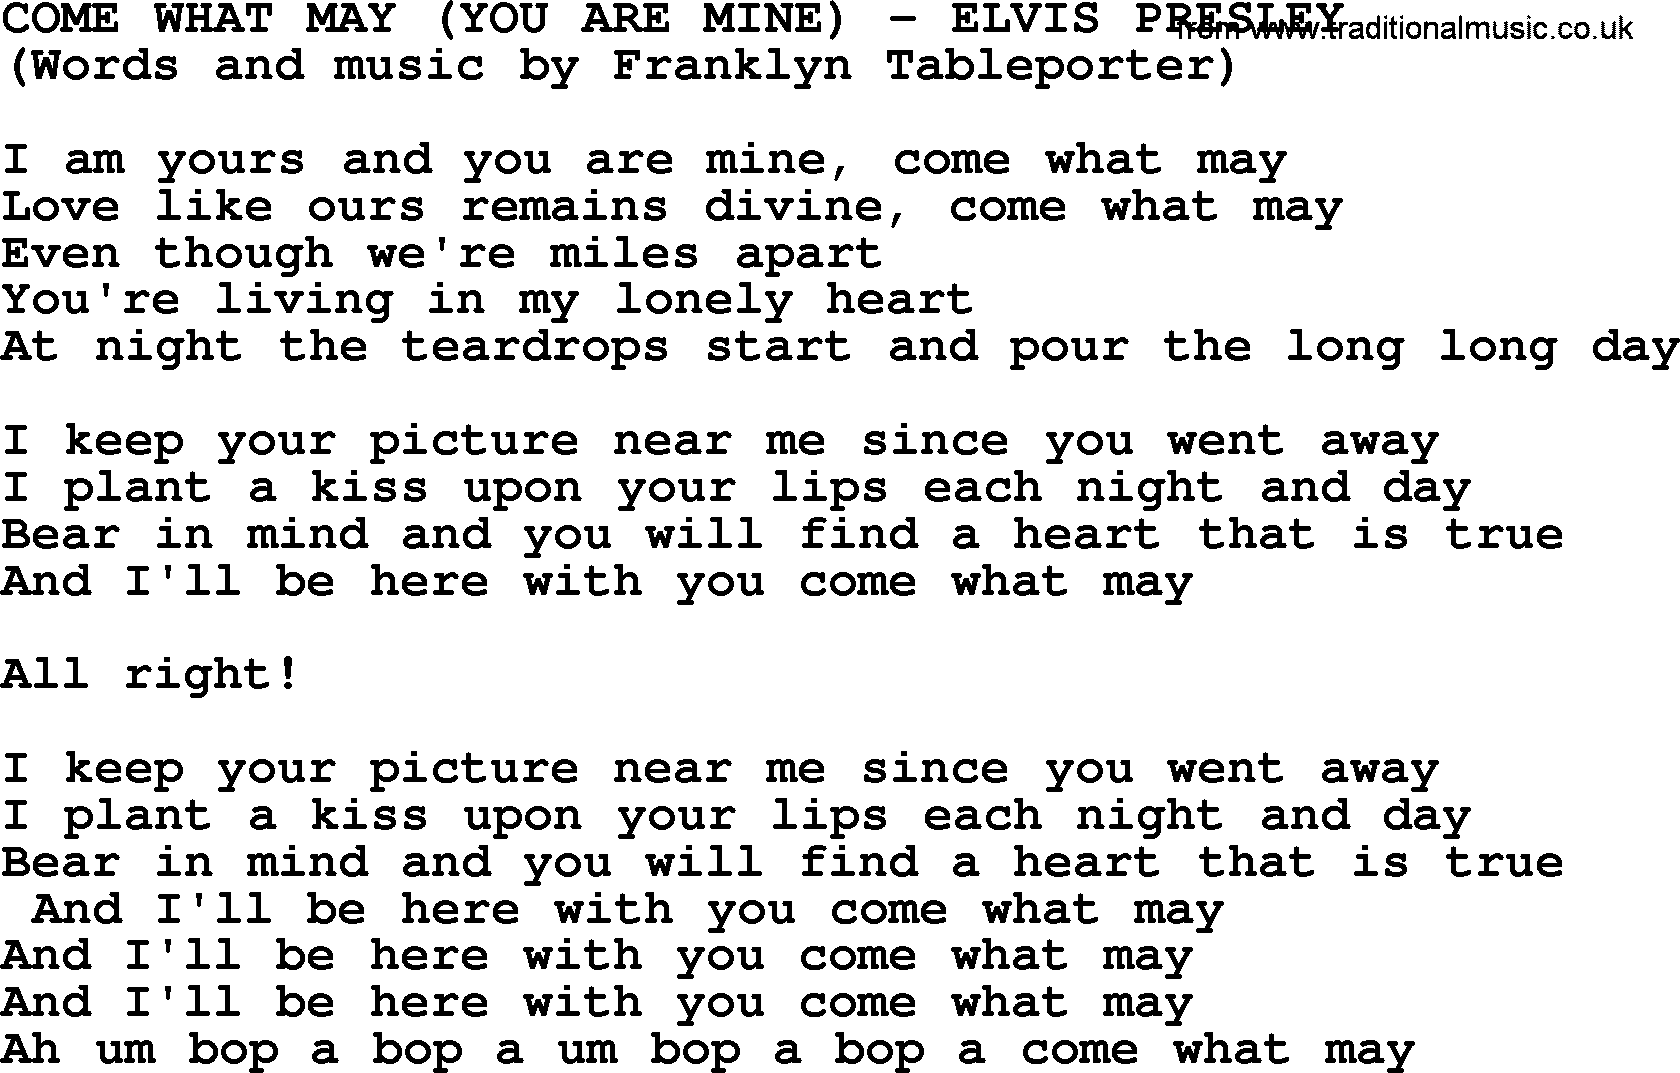 Elvis Presley song: Come What May (You Are Mine) lyrics